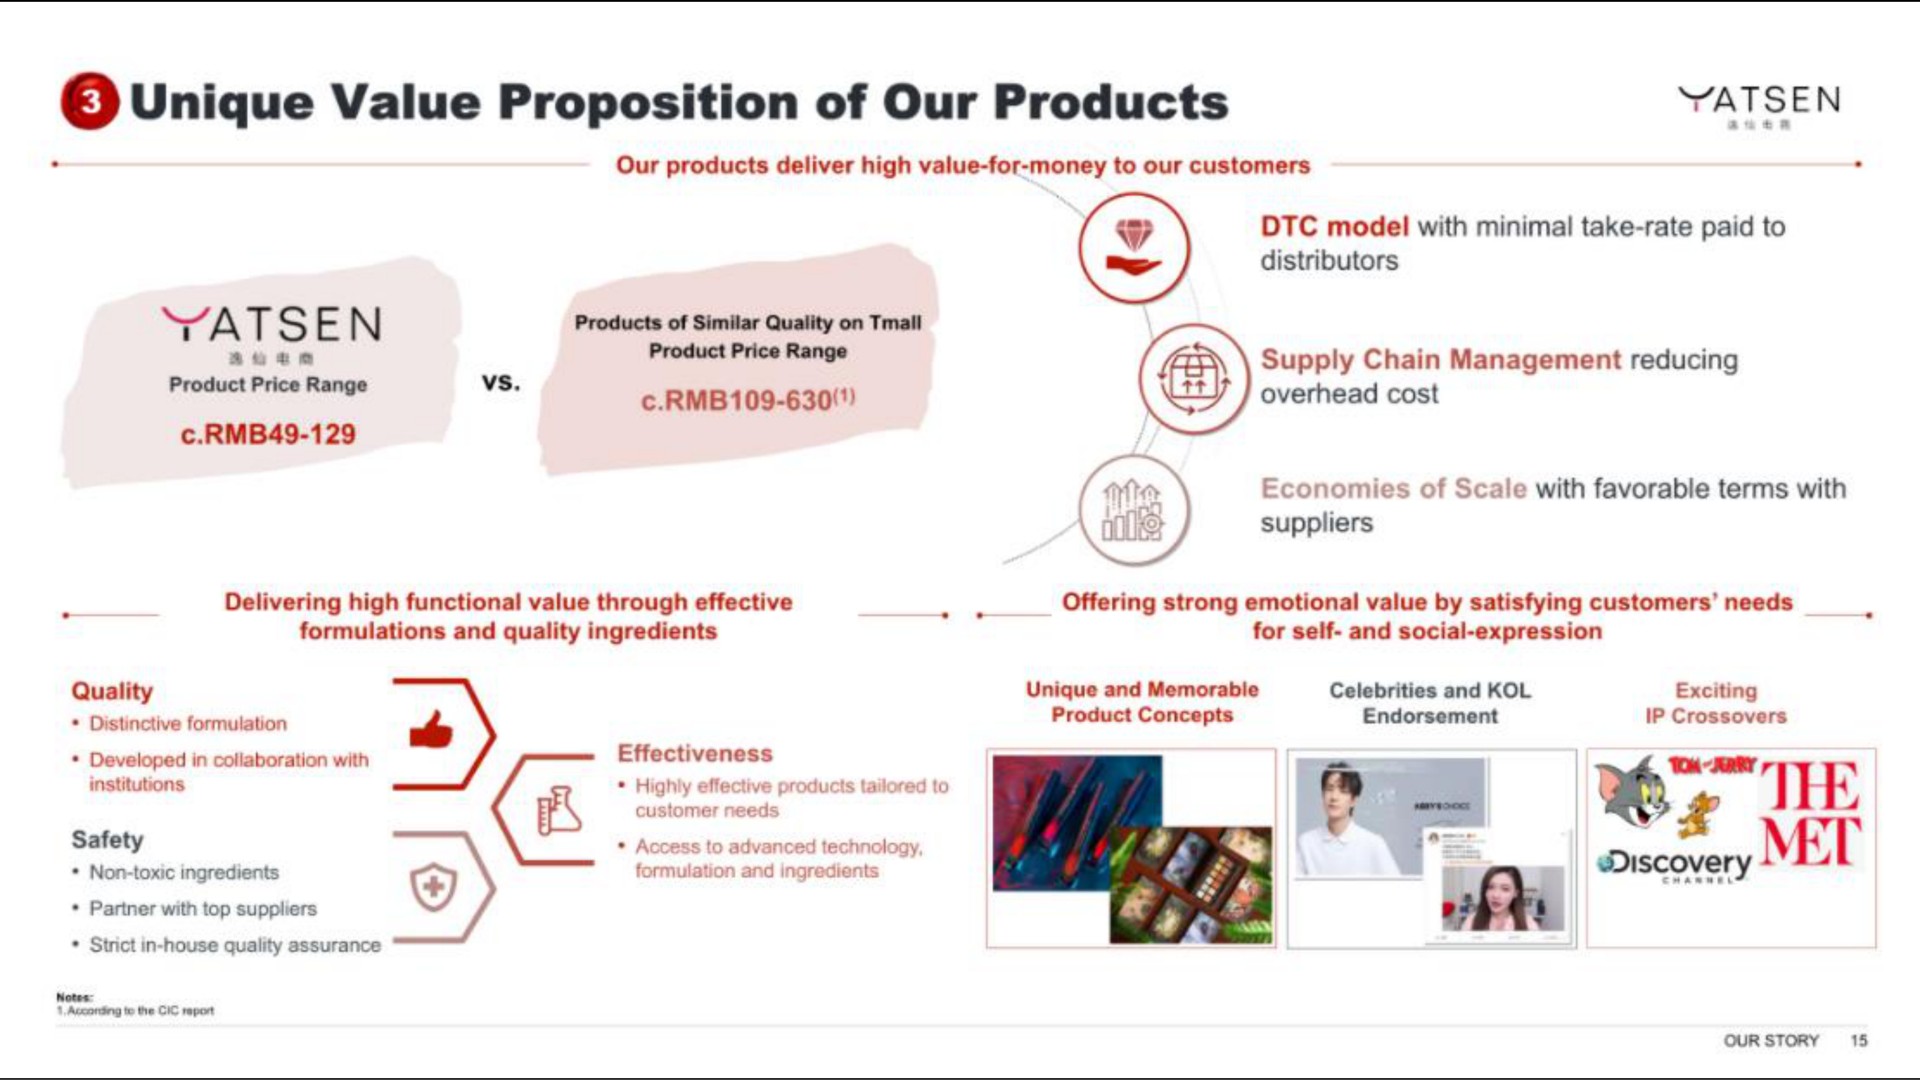 value proposition of our products the be met | Yatsen